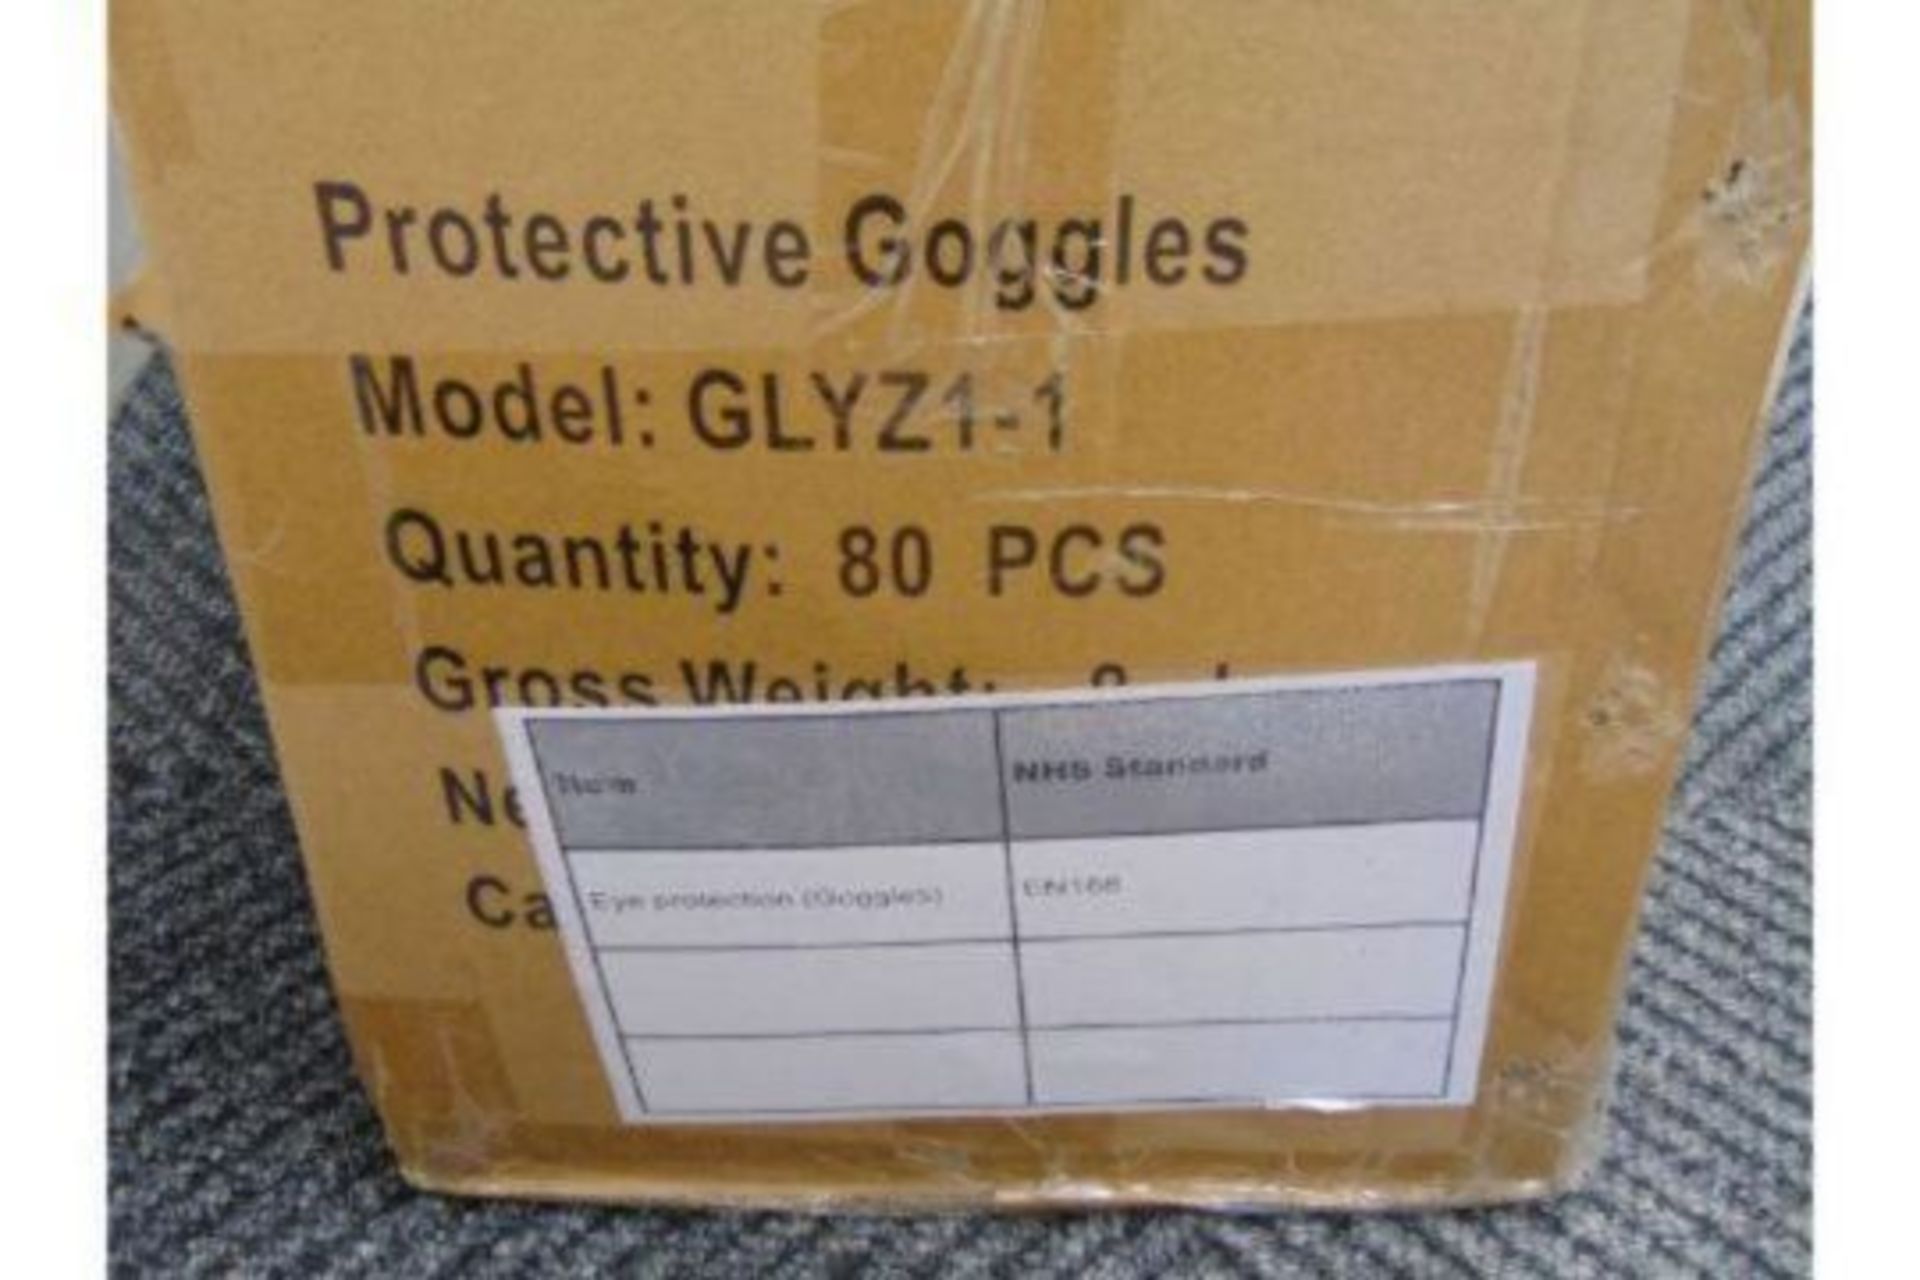 1440 Protective Goggles GLYZ1-1, 1 Pallet (18 Boxes, 80 per box) New Unissued Reserve Stock - Image 15 of 16